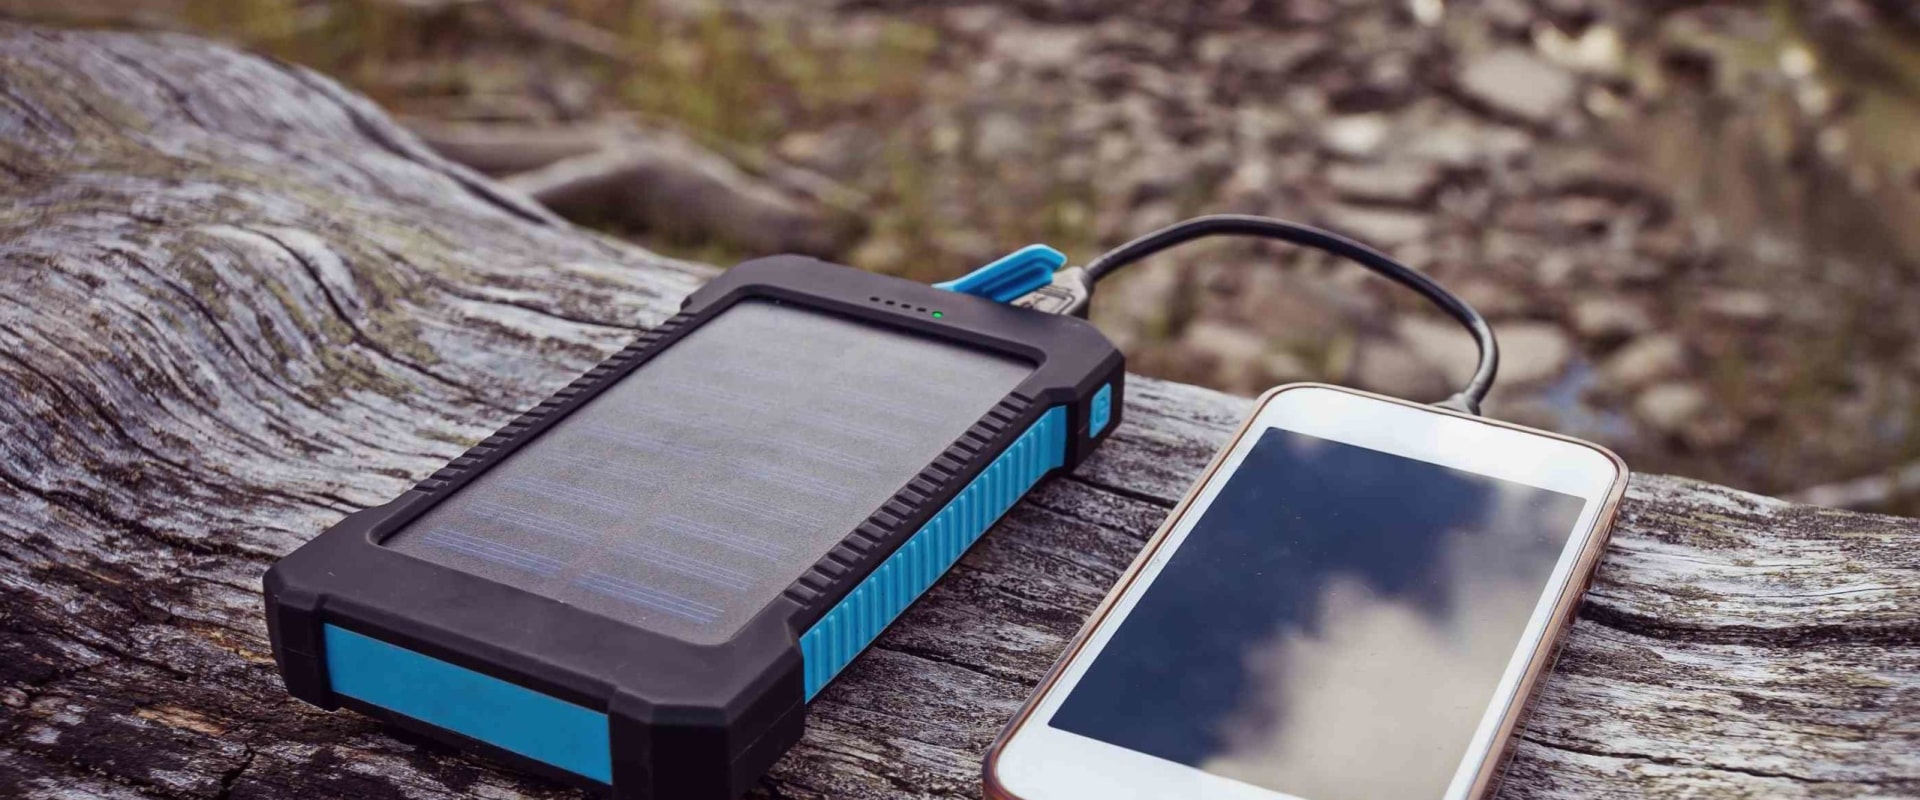 Do you need to charge a solar power bank?